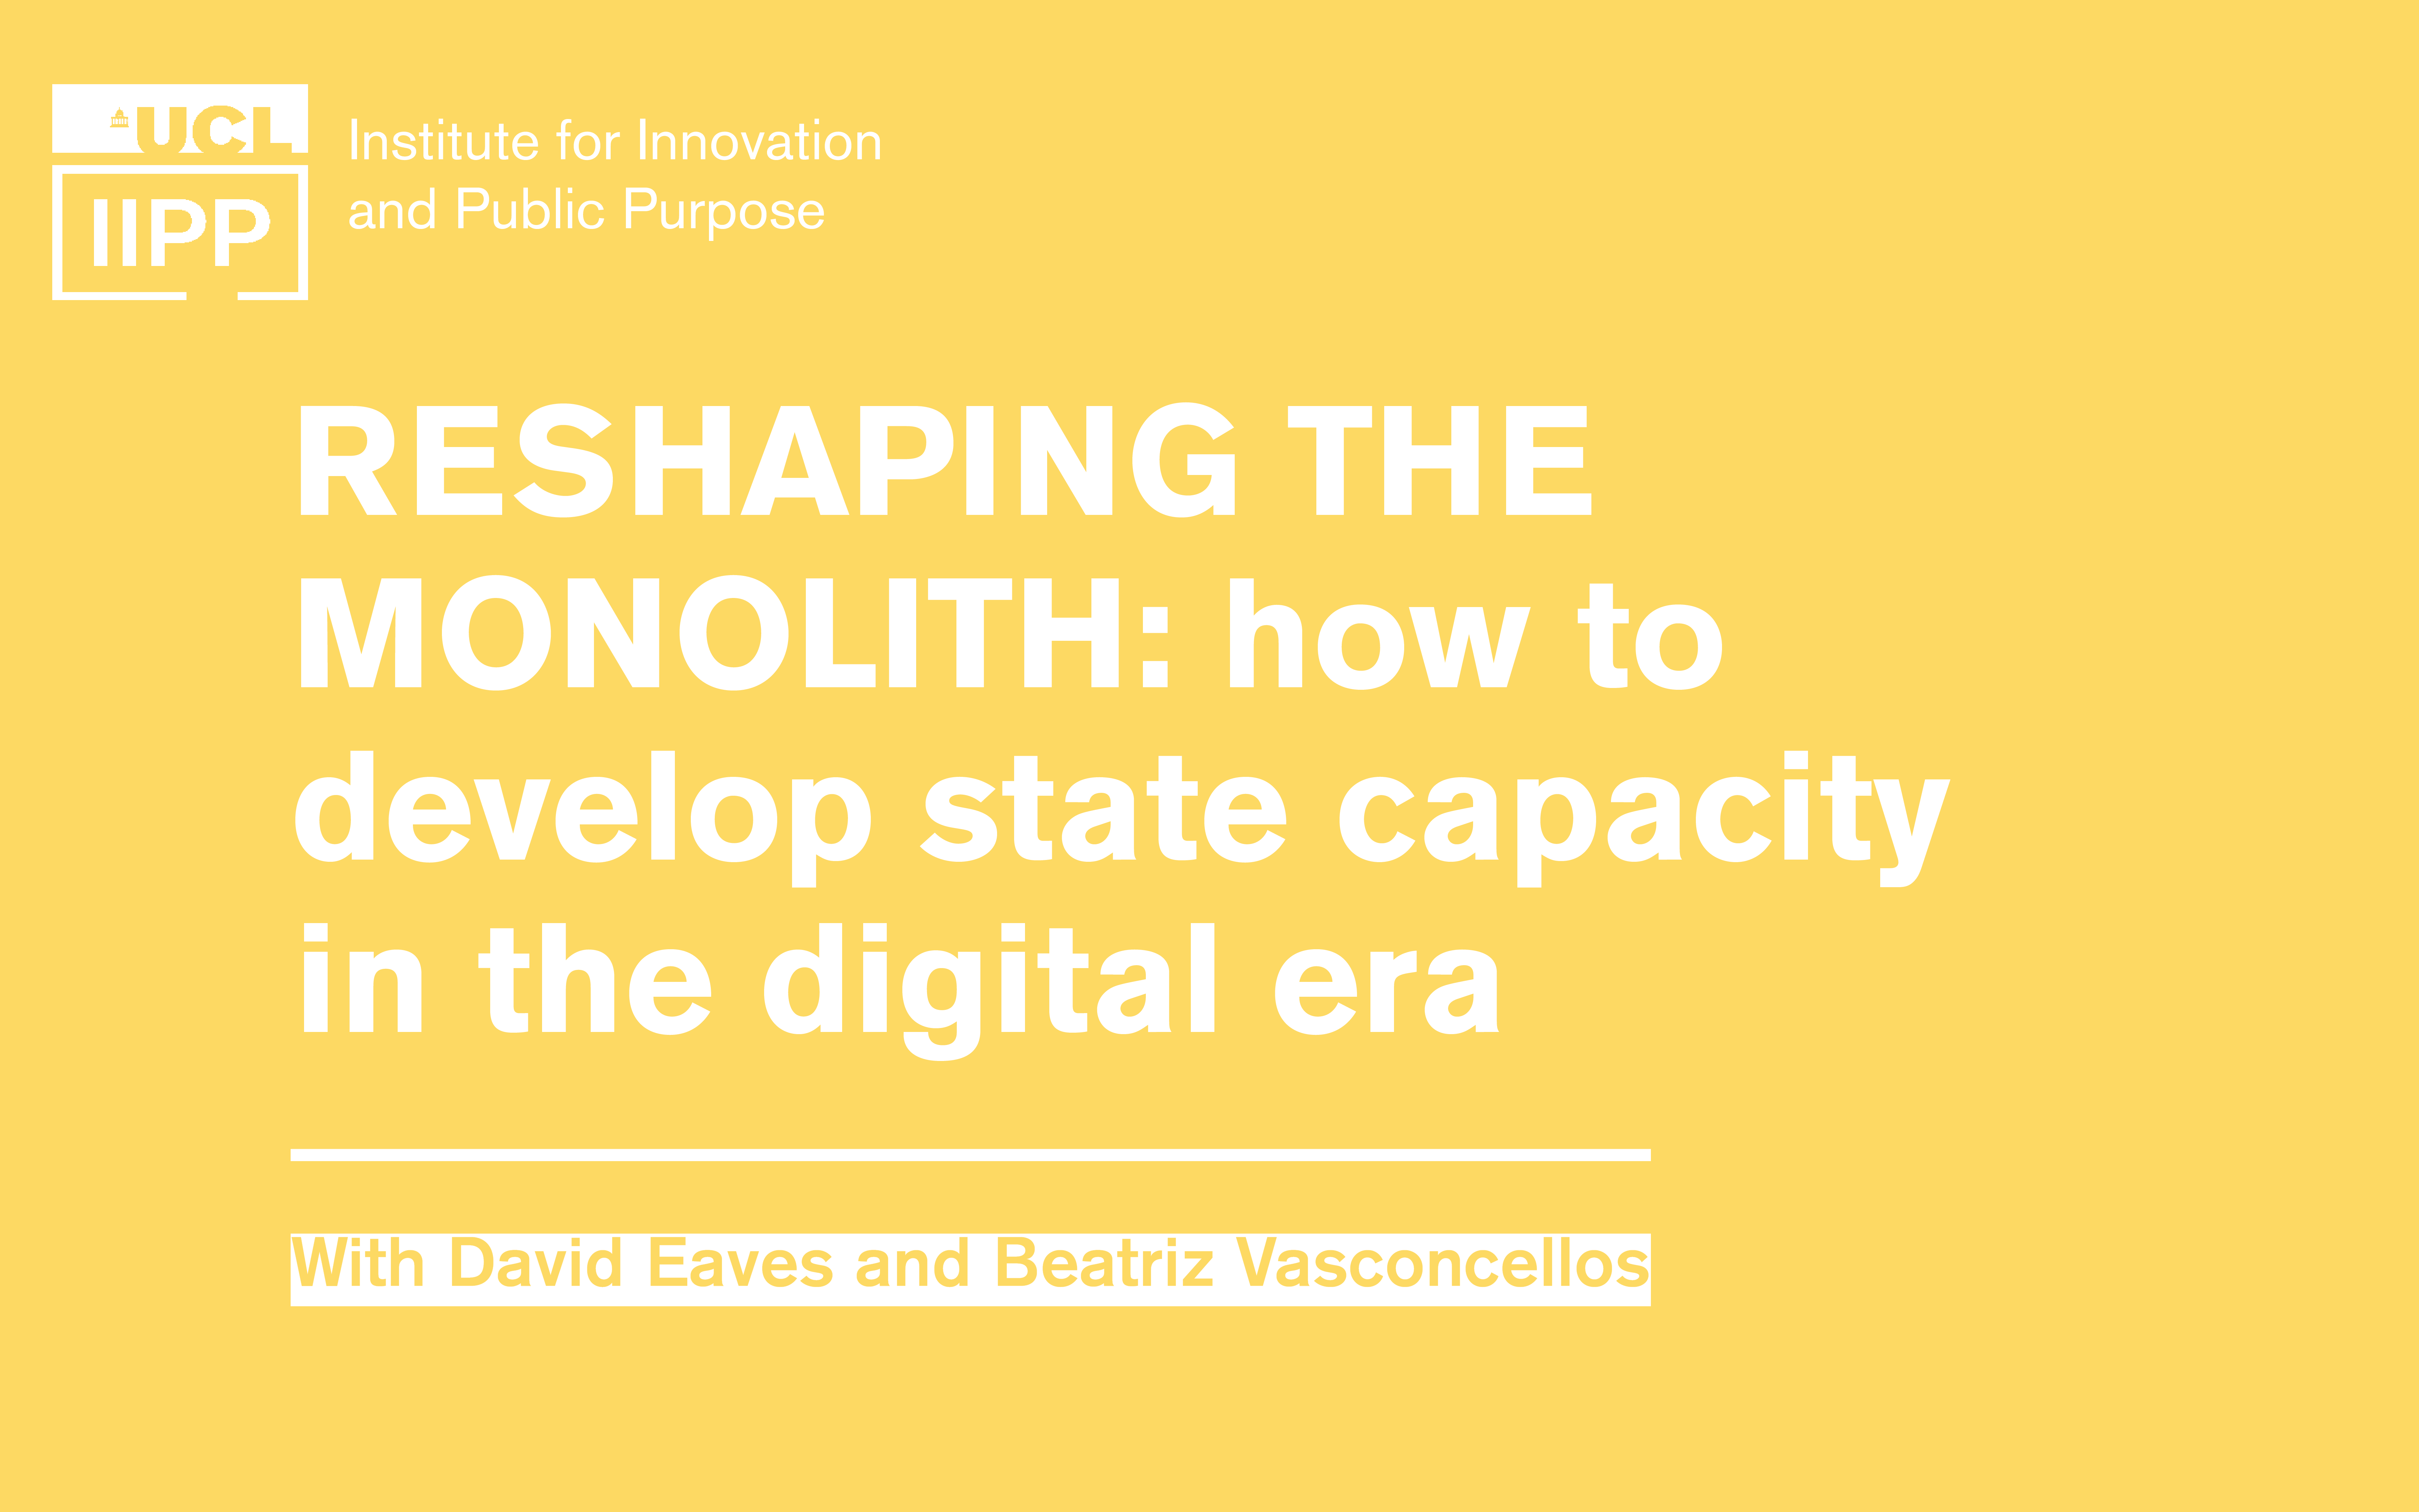 Reshaping the Monolith: how to develop state capacity in the digital era